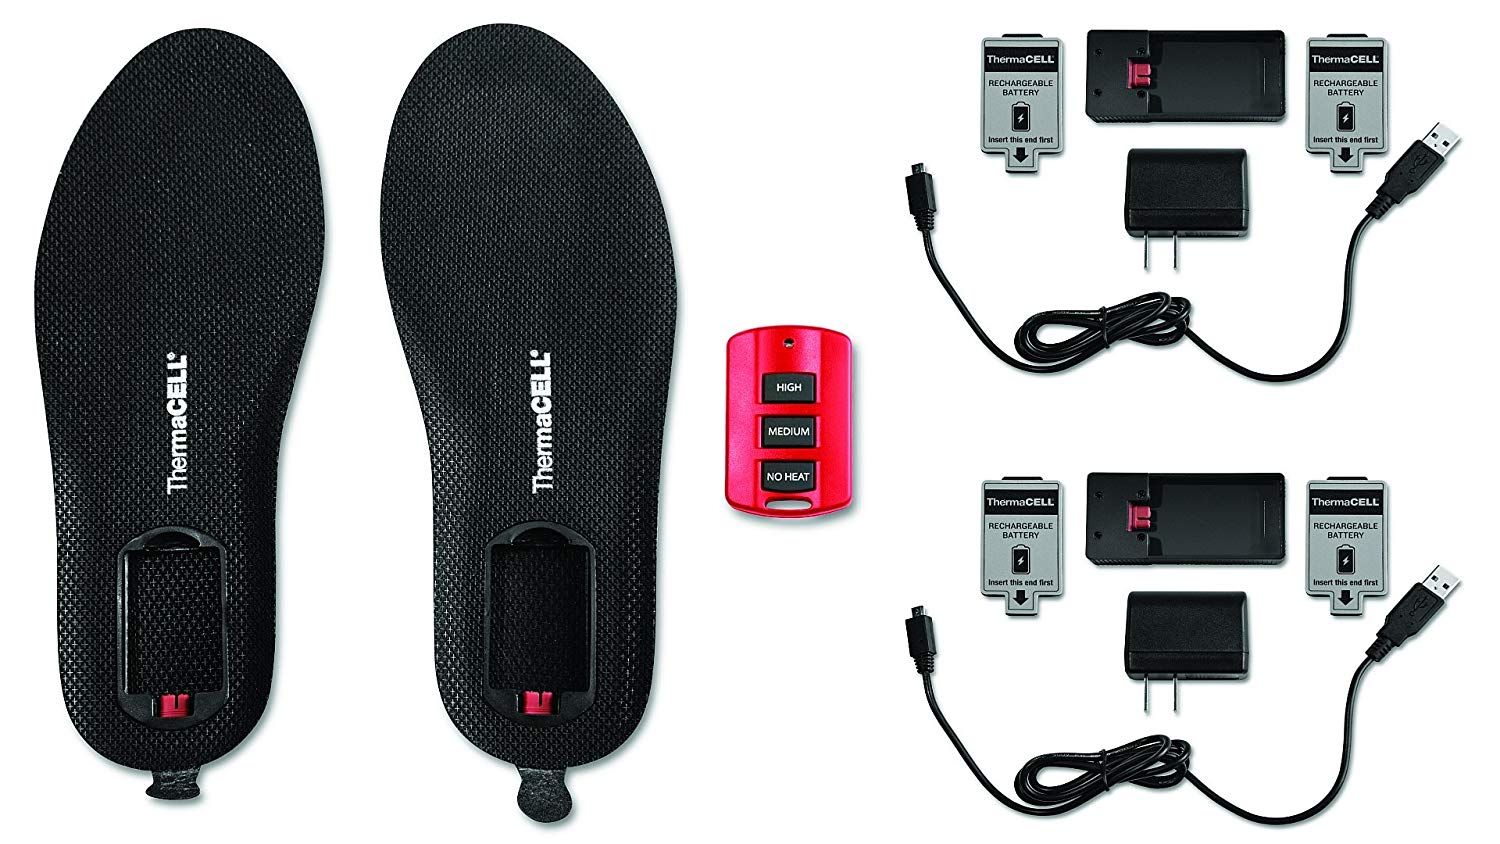 ThermaCELL ProFLEX Remote-Control Heated Insoles Bundle with Extra Battery Pack, XL